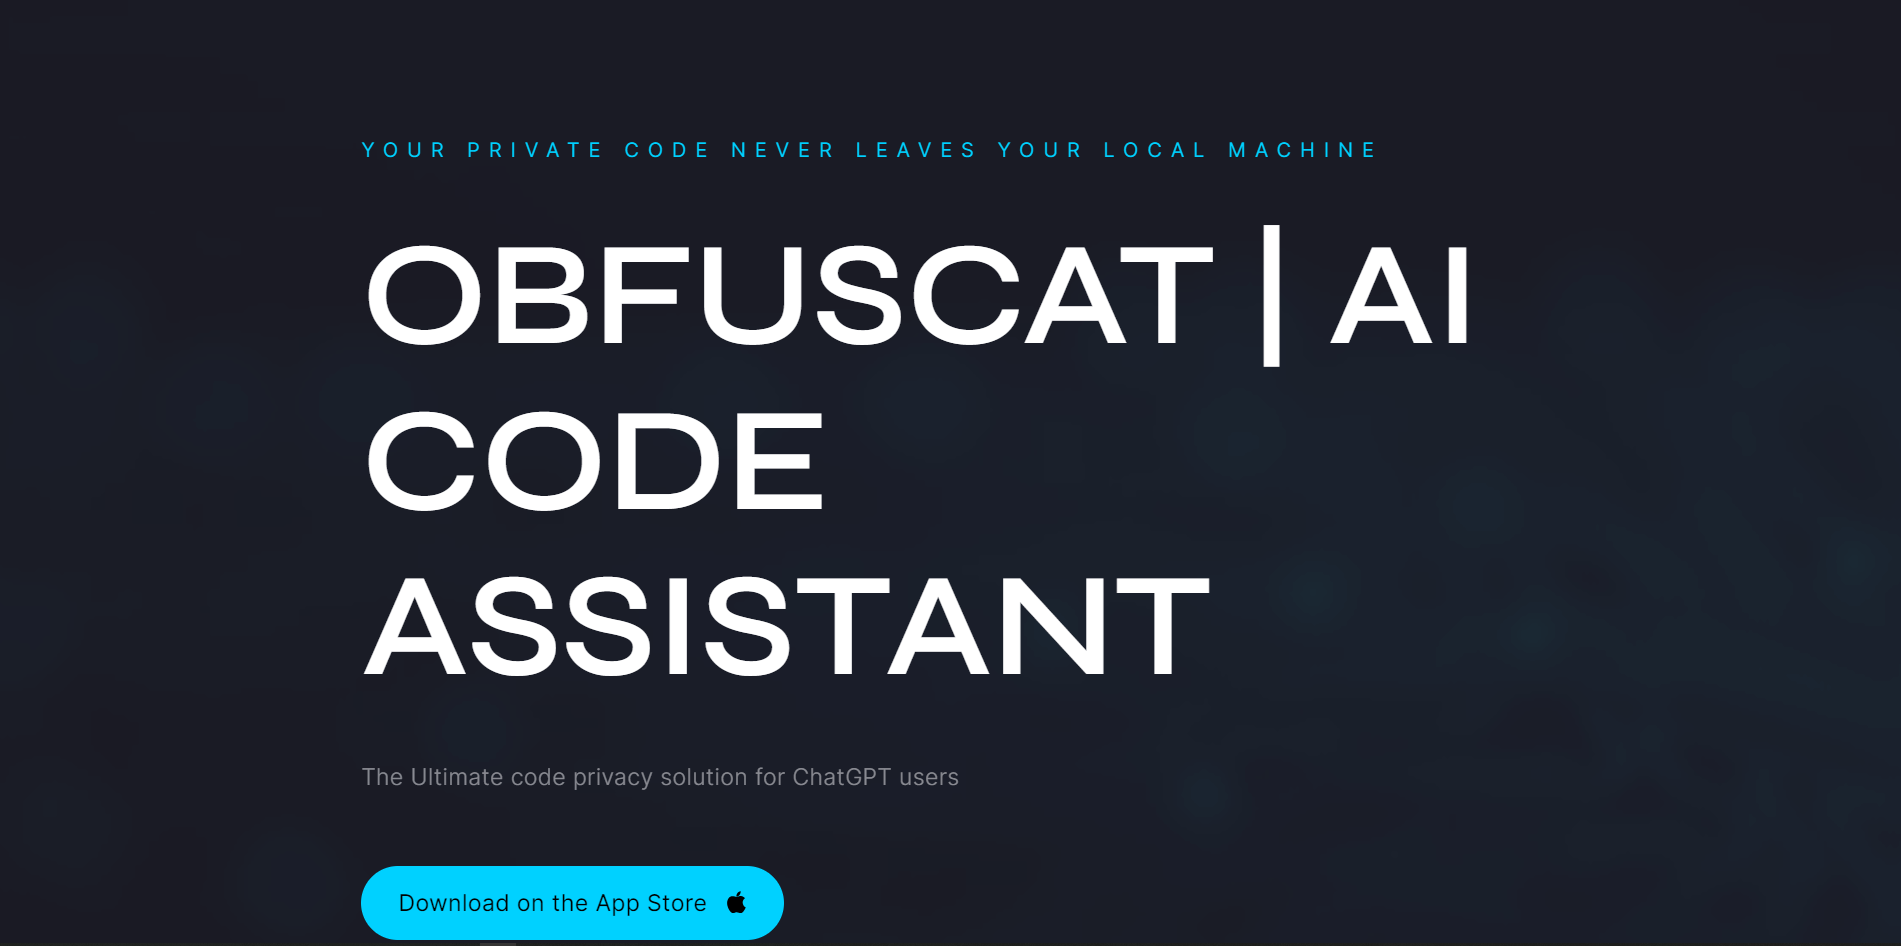 obfuscat.com | OBFUSCAT | AI CODE ASSISTANT The Ultimate code privacy solution for ChatGPT users